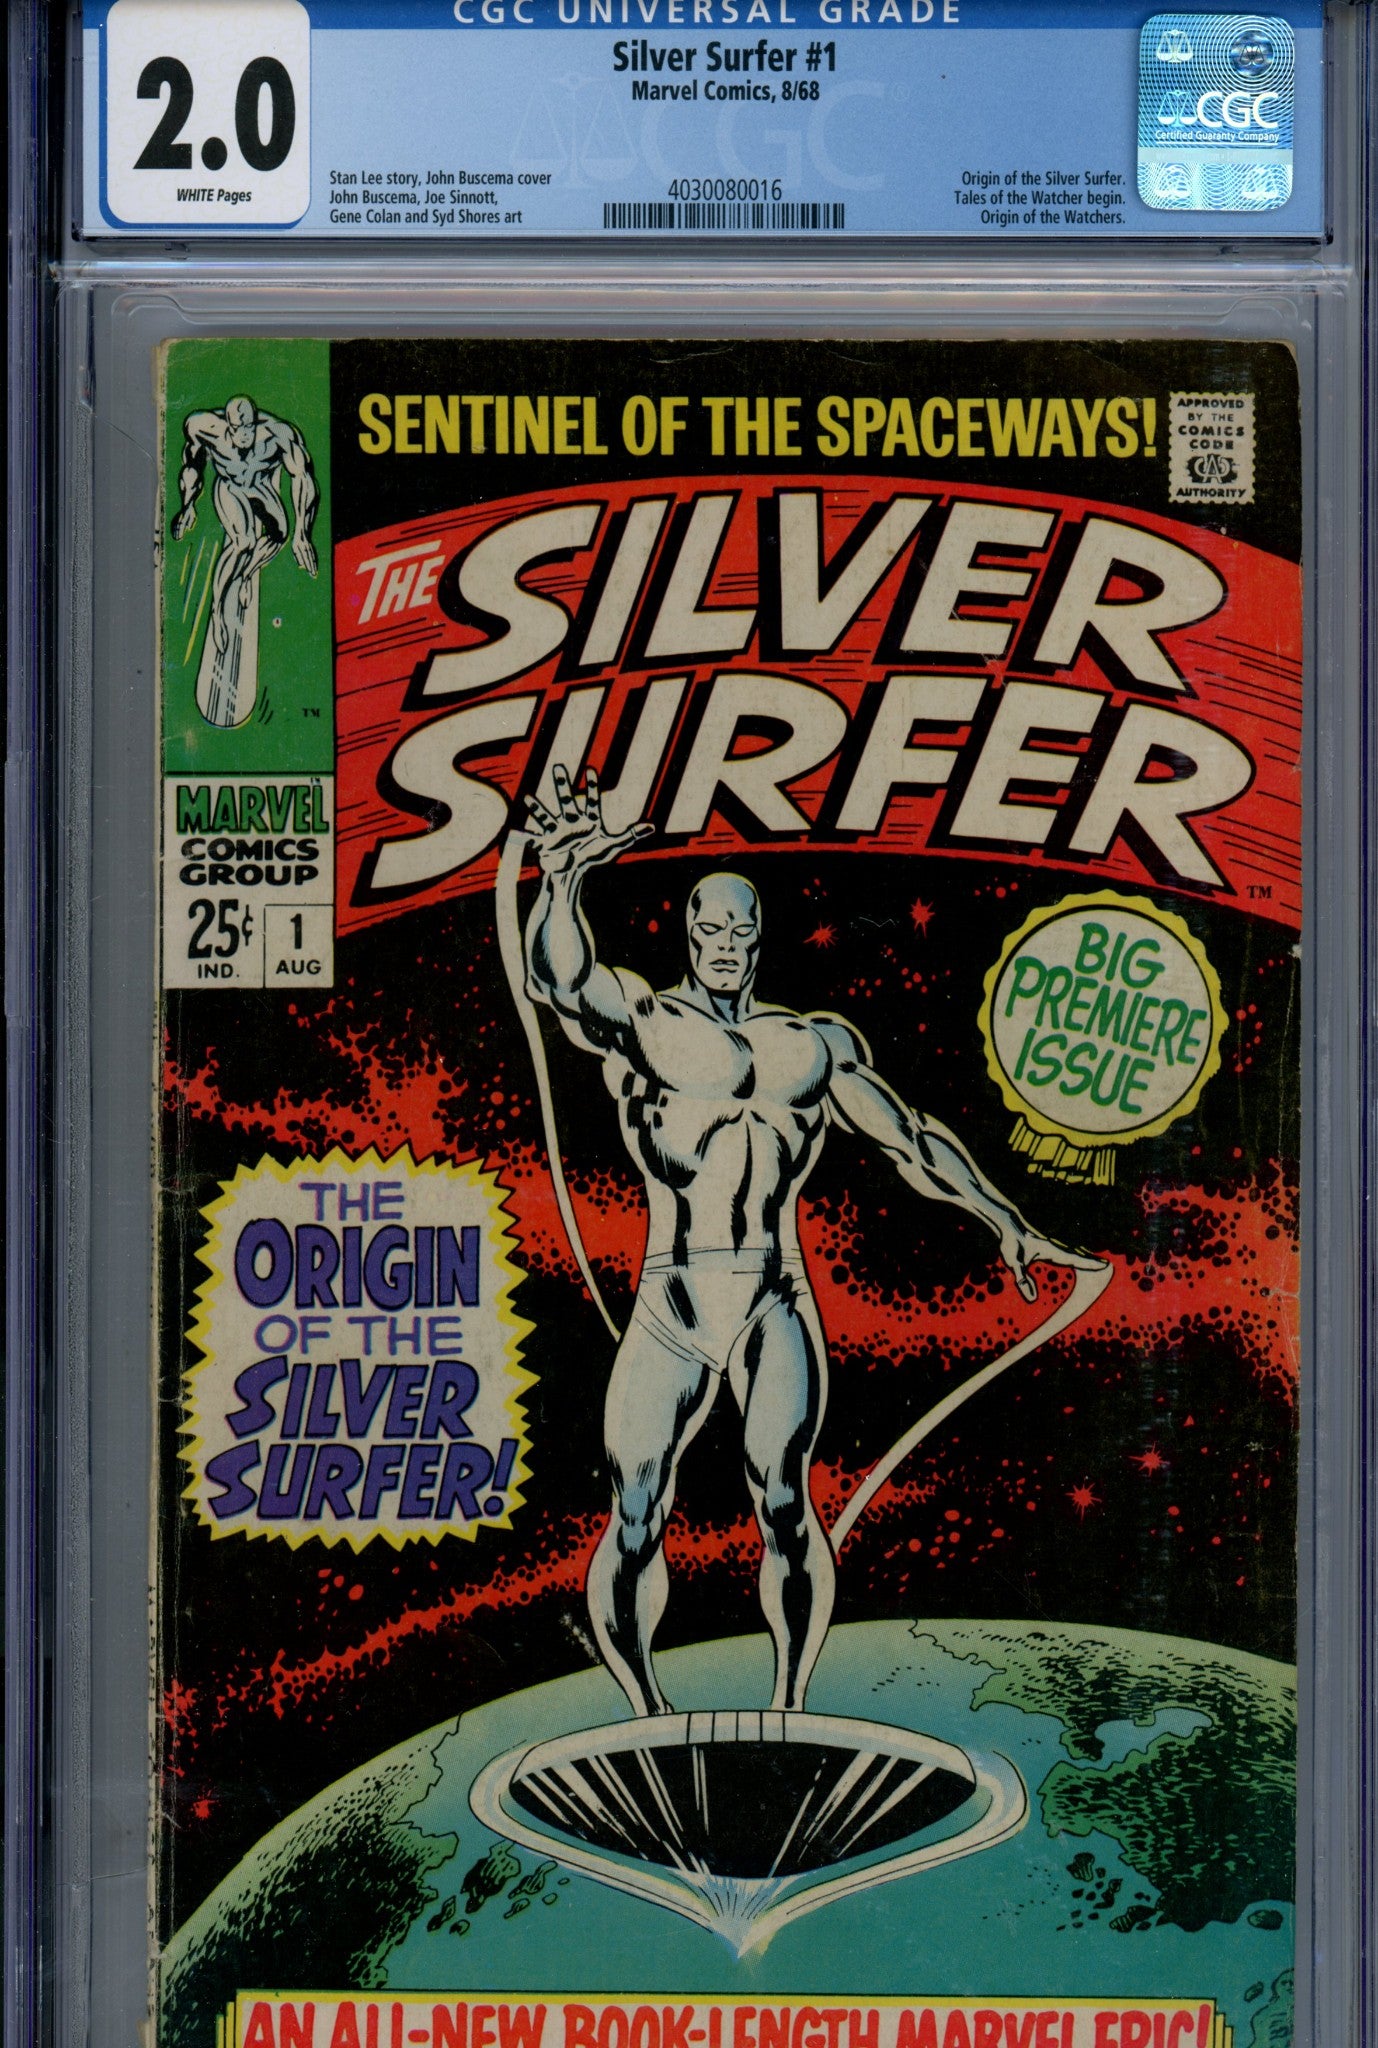 The Silver Surfer Vol 1 1 CGC 2.0 (GD) (1968) 